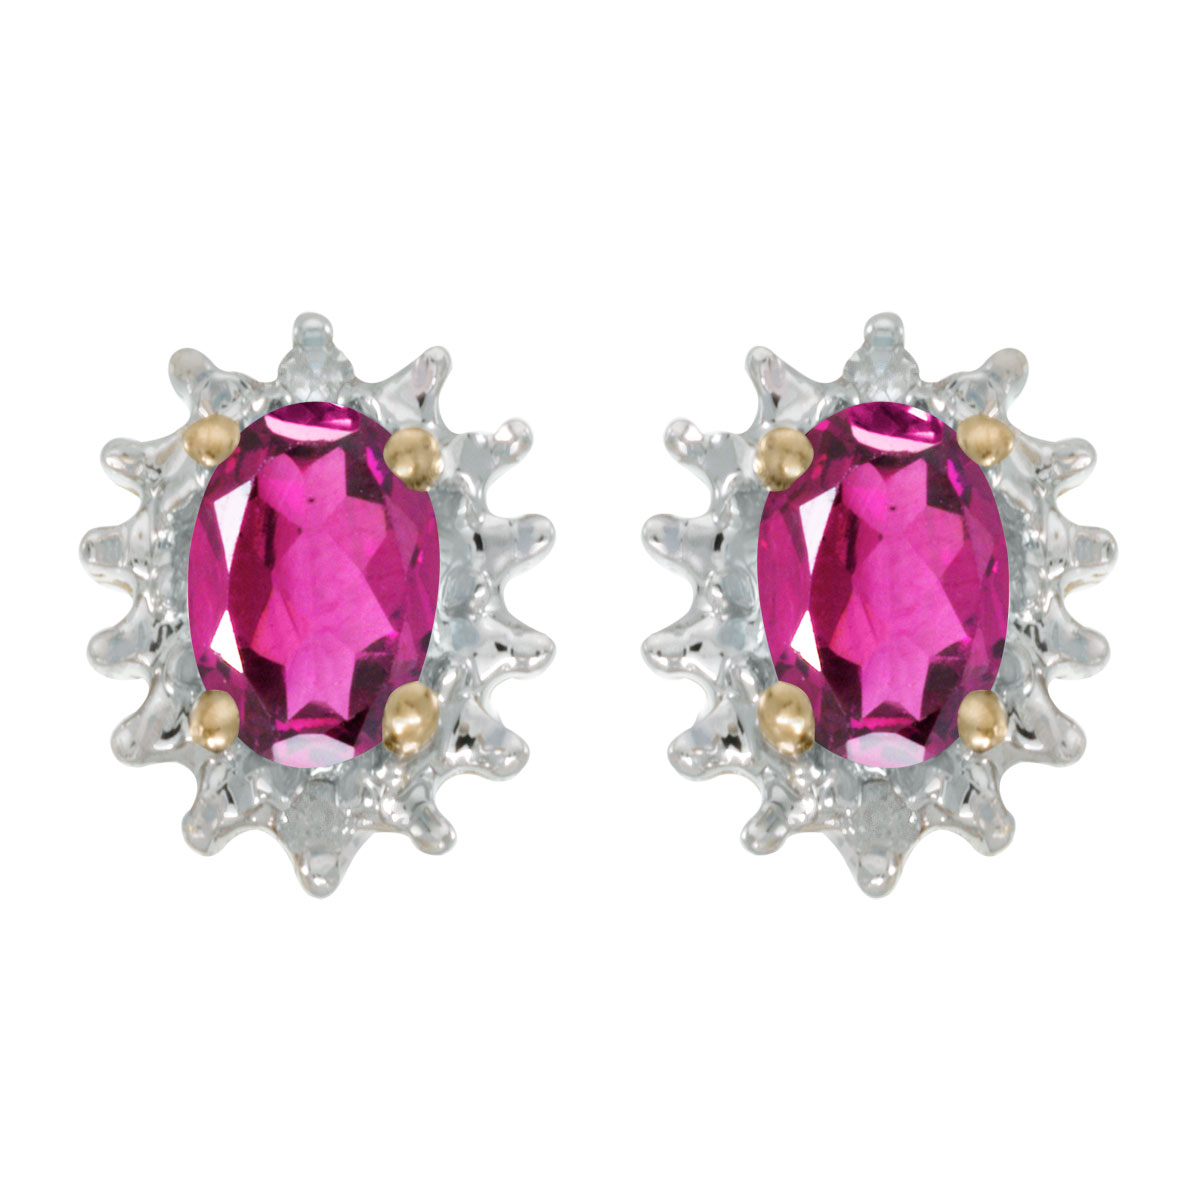 These 14k yellow gold oval pink topaz and diamond earrings feature 6x4 mm genuine natural pink topazs with a 0.86 ct total weight and .04 ct diamonds.